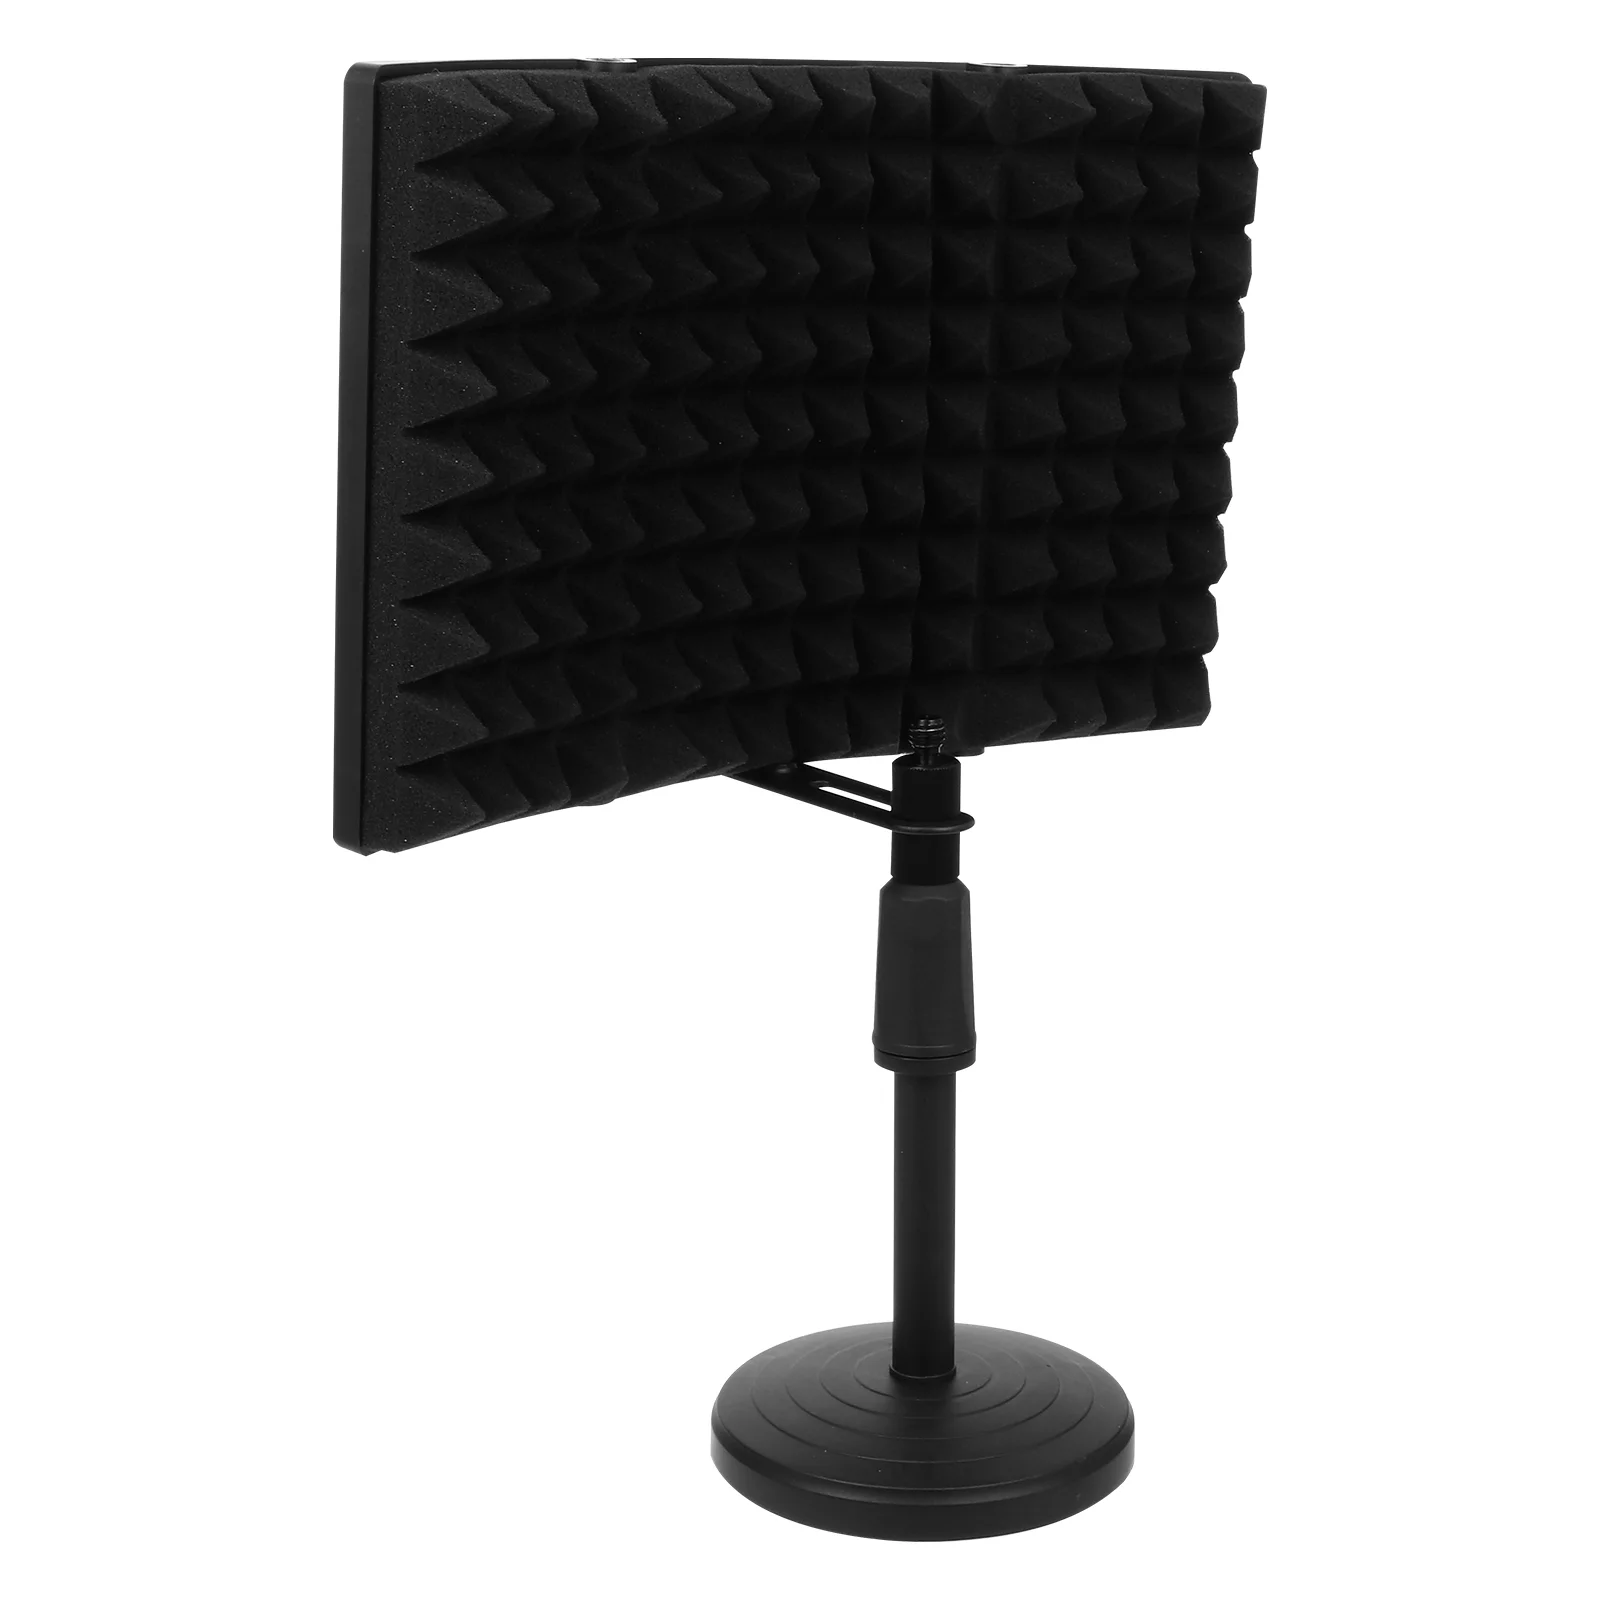 

Microphone Wind Screen Sound-absorbing Cover Noise Cancelling Panels Noise-proof Filter Shield Sponge